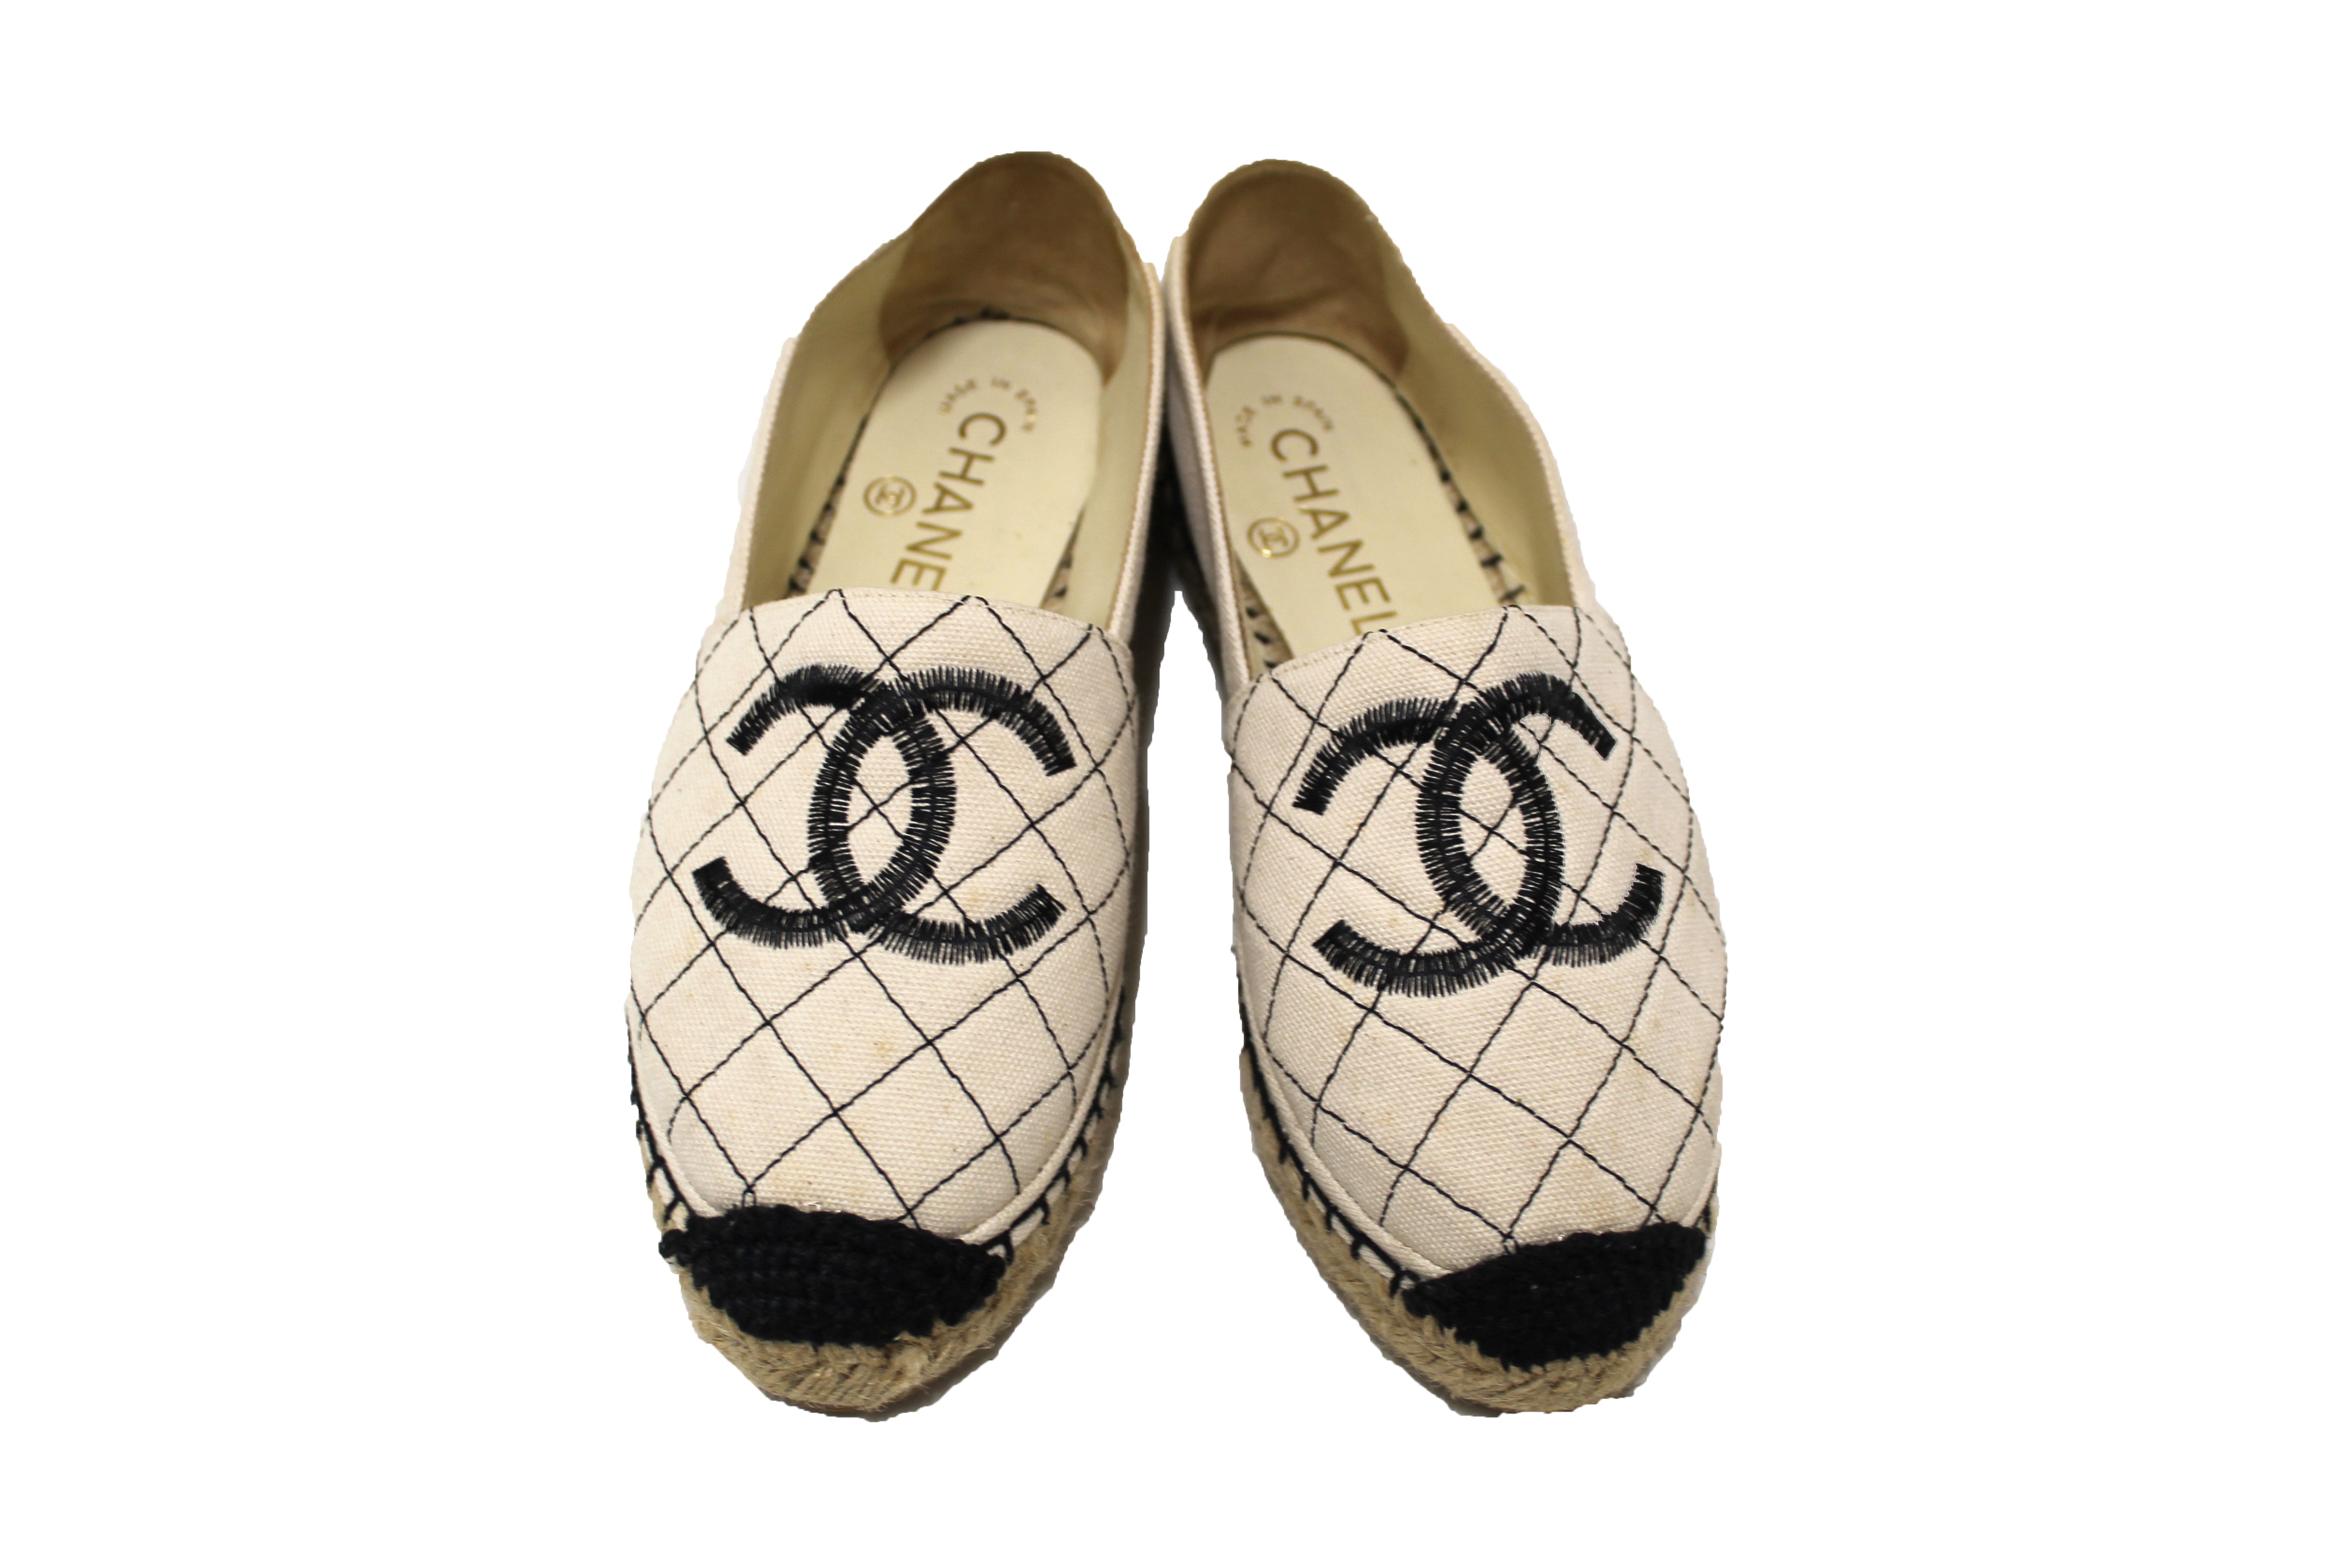 CHANEL, Shoes, Chanel Espadrilles In Beige Black Size 37 Sales 65 Fixed